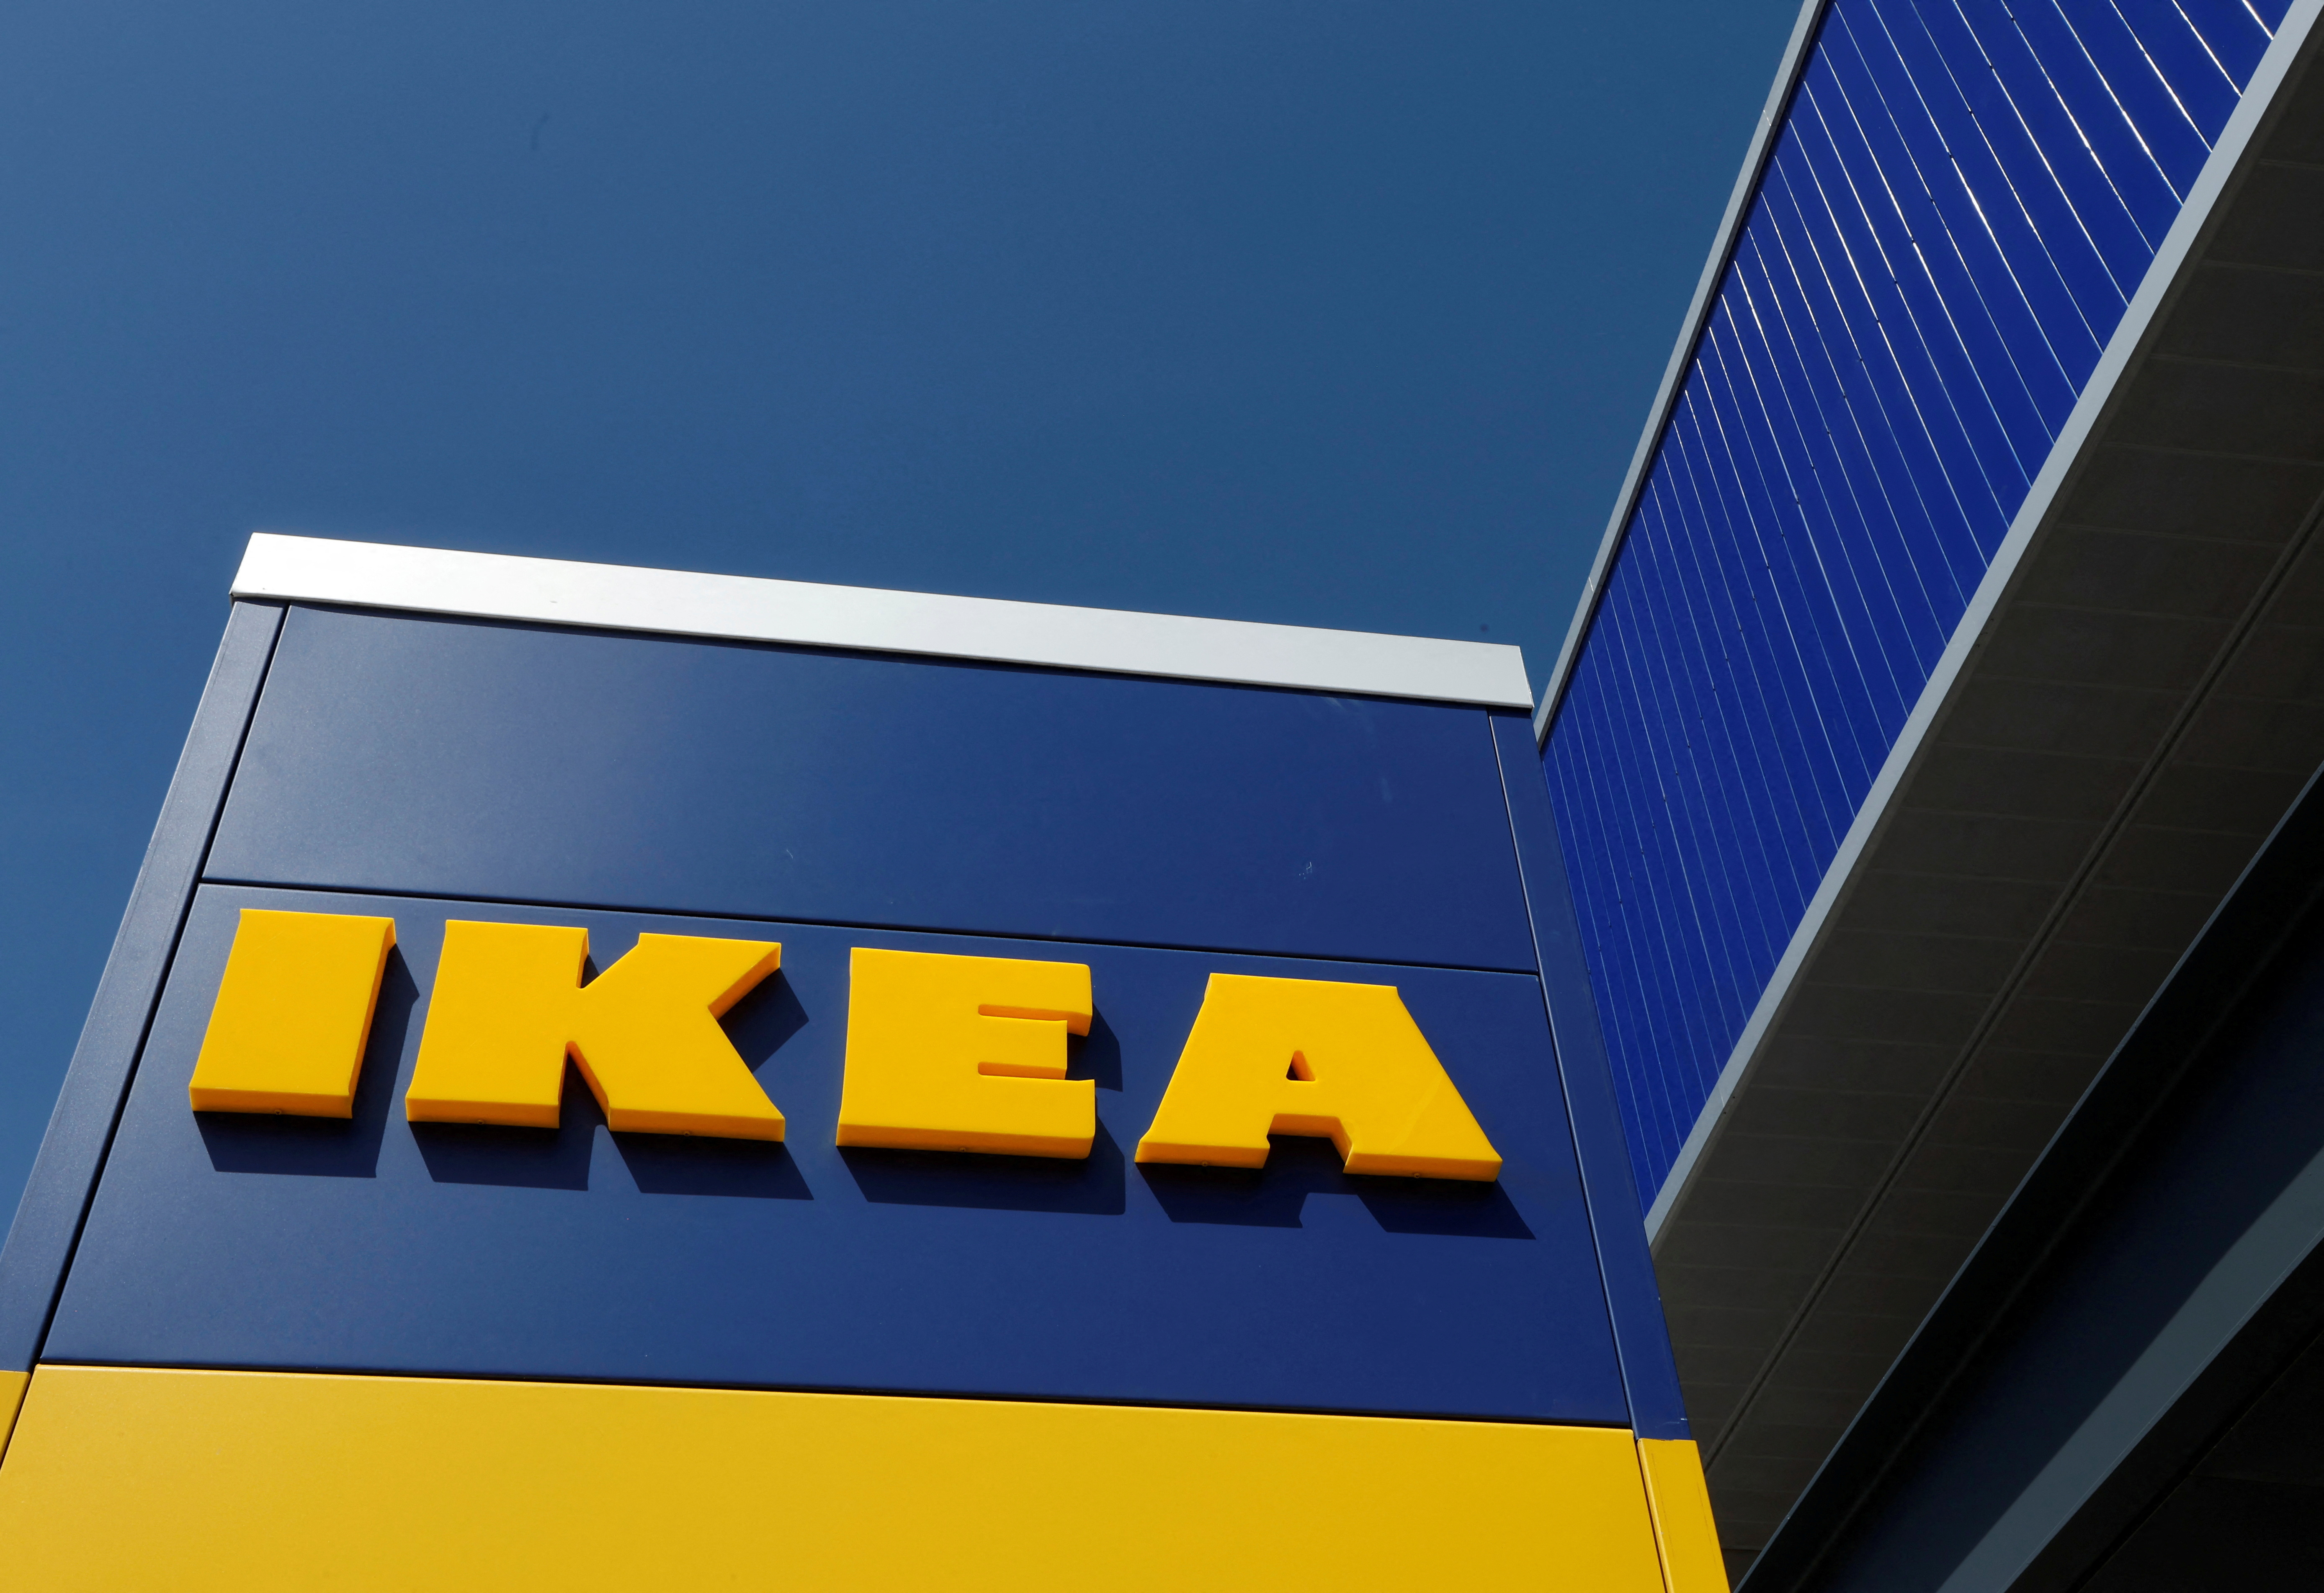 Ikea promises to cut furniture prices as costs start to ease